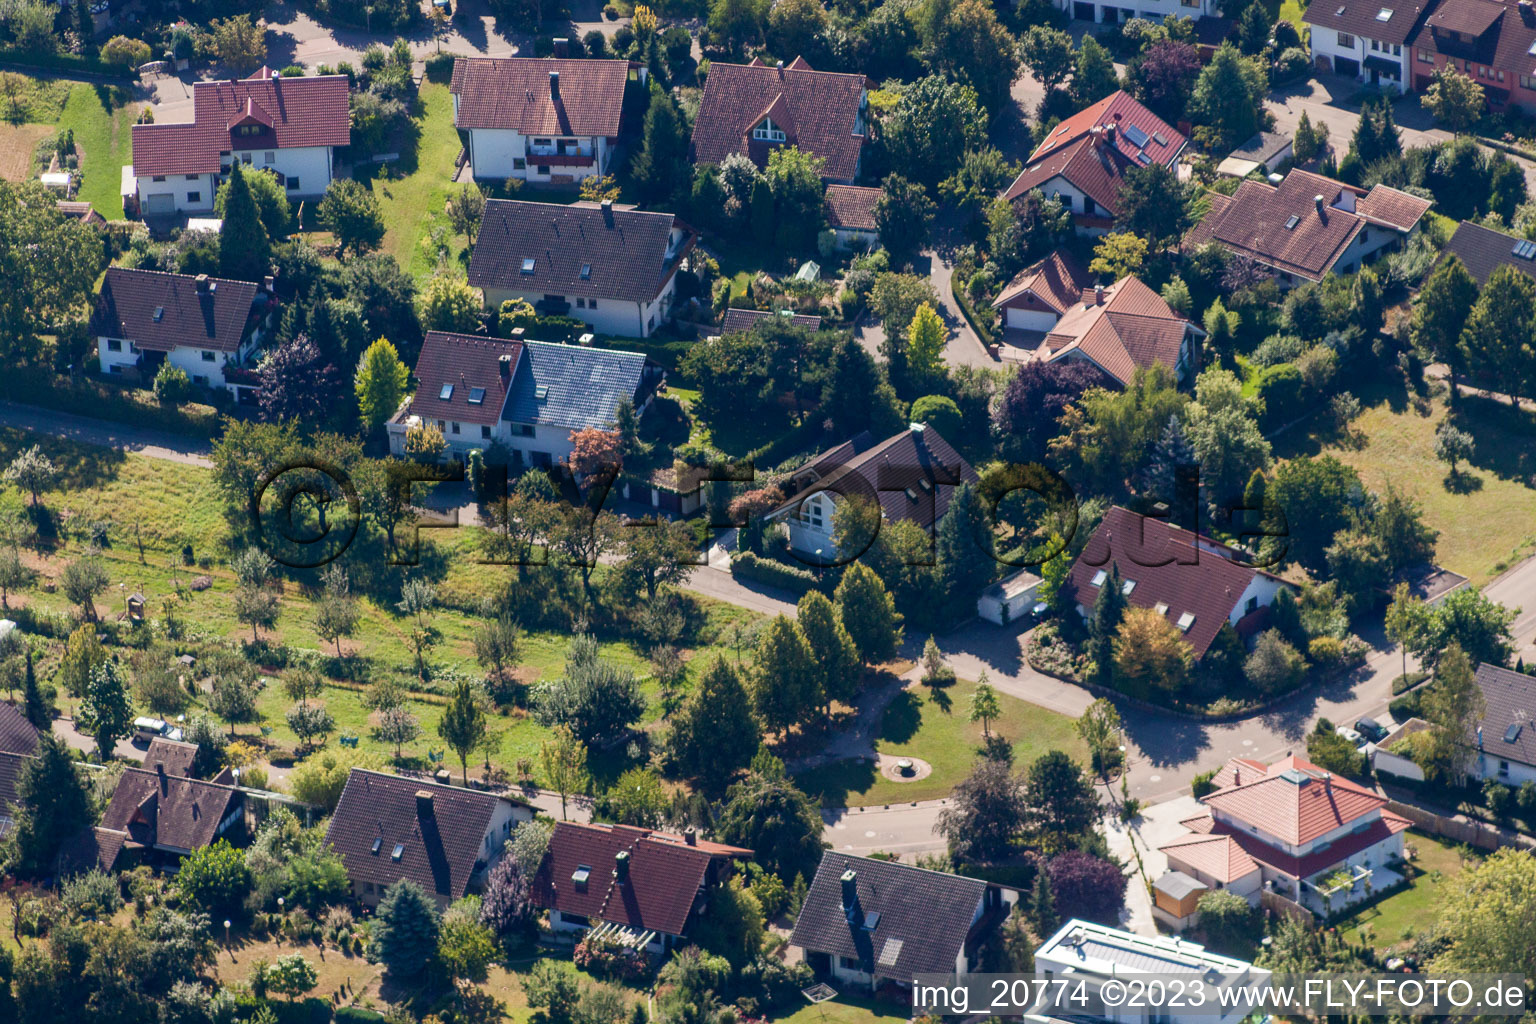 Aerial photograpy of In the Ries in the district Fessenbach in Offenburg in the state Baden-Wuerttemberg, Germany